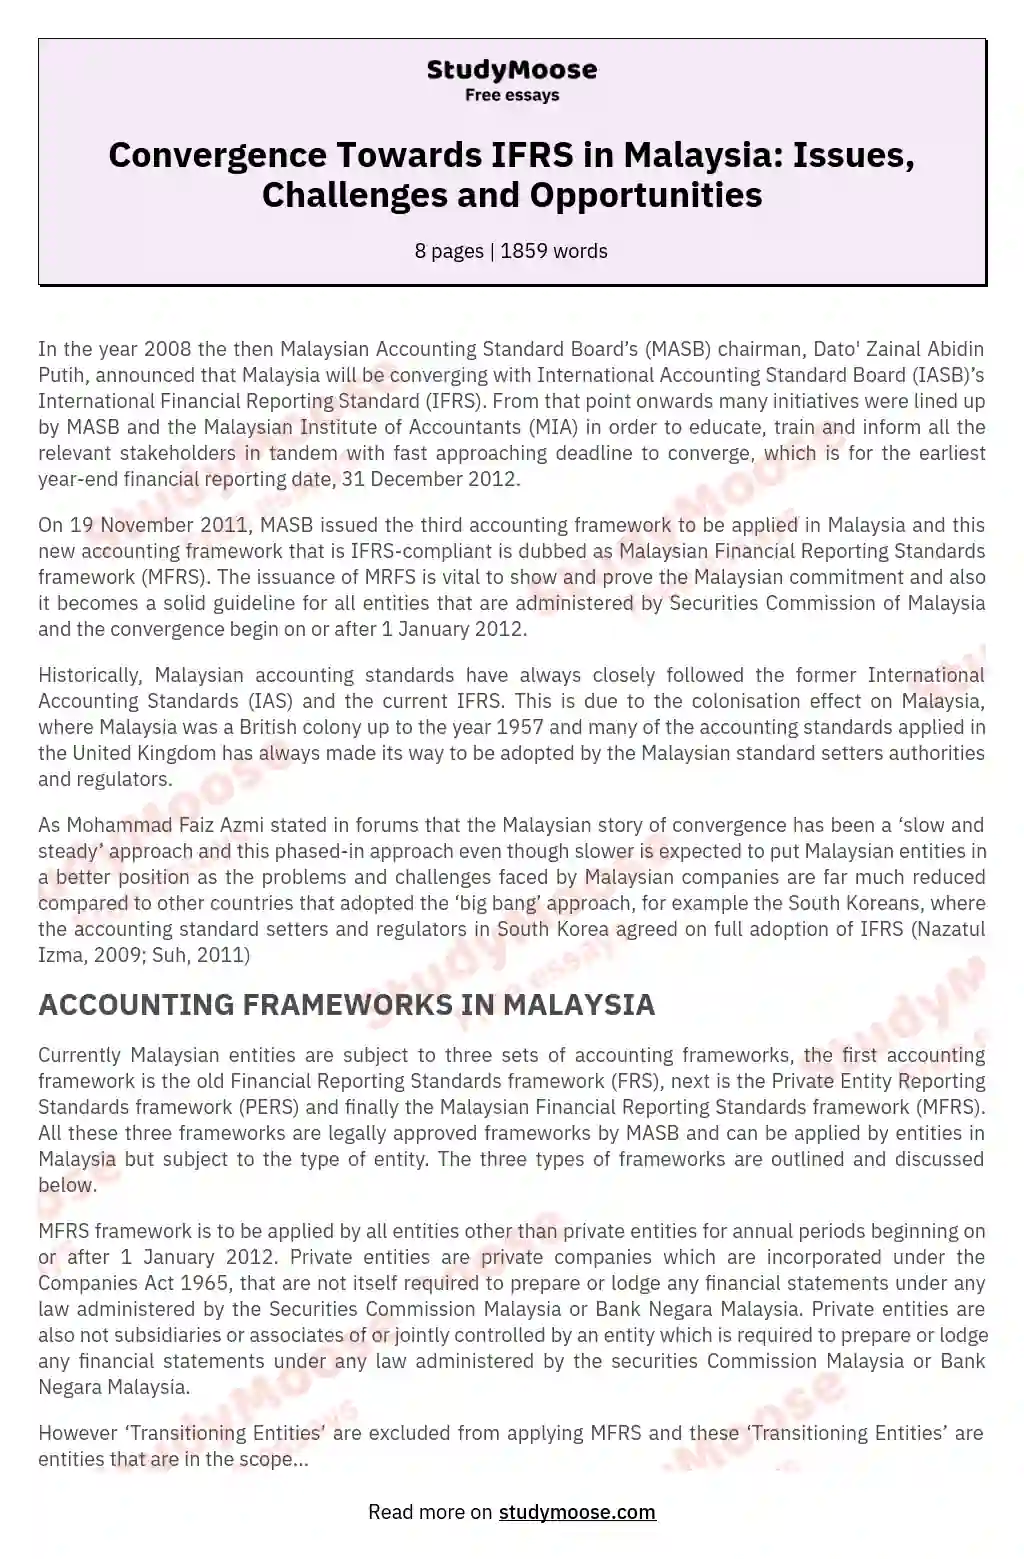 Convergence Towards IFRS in Malaysia: Issues, Challenges and Opportunities essay